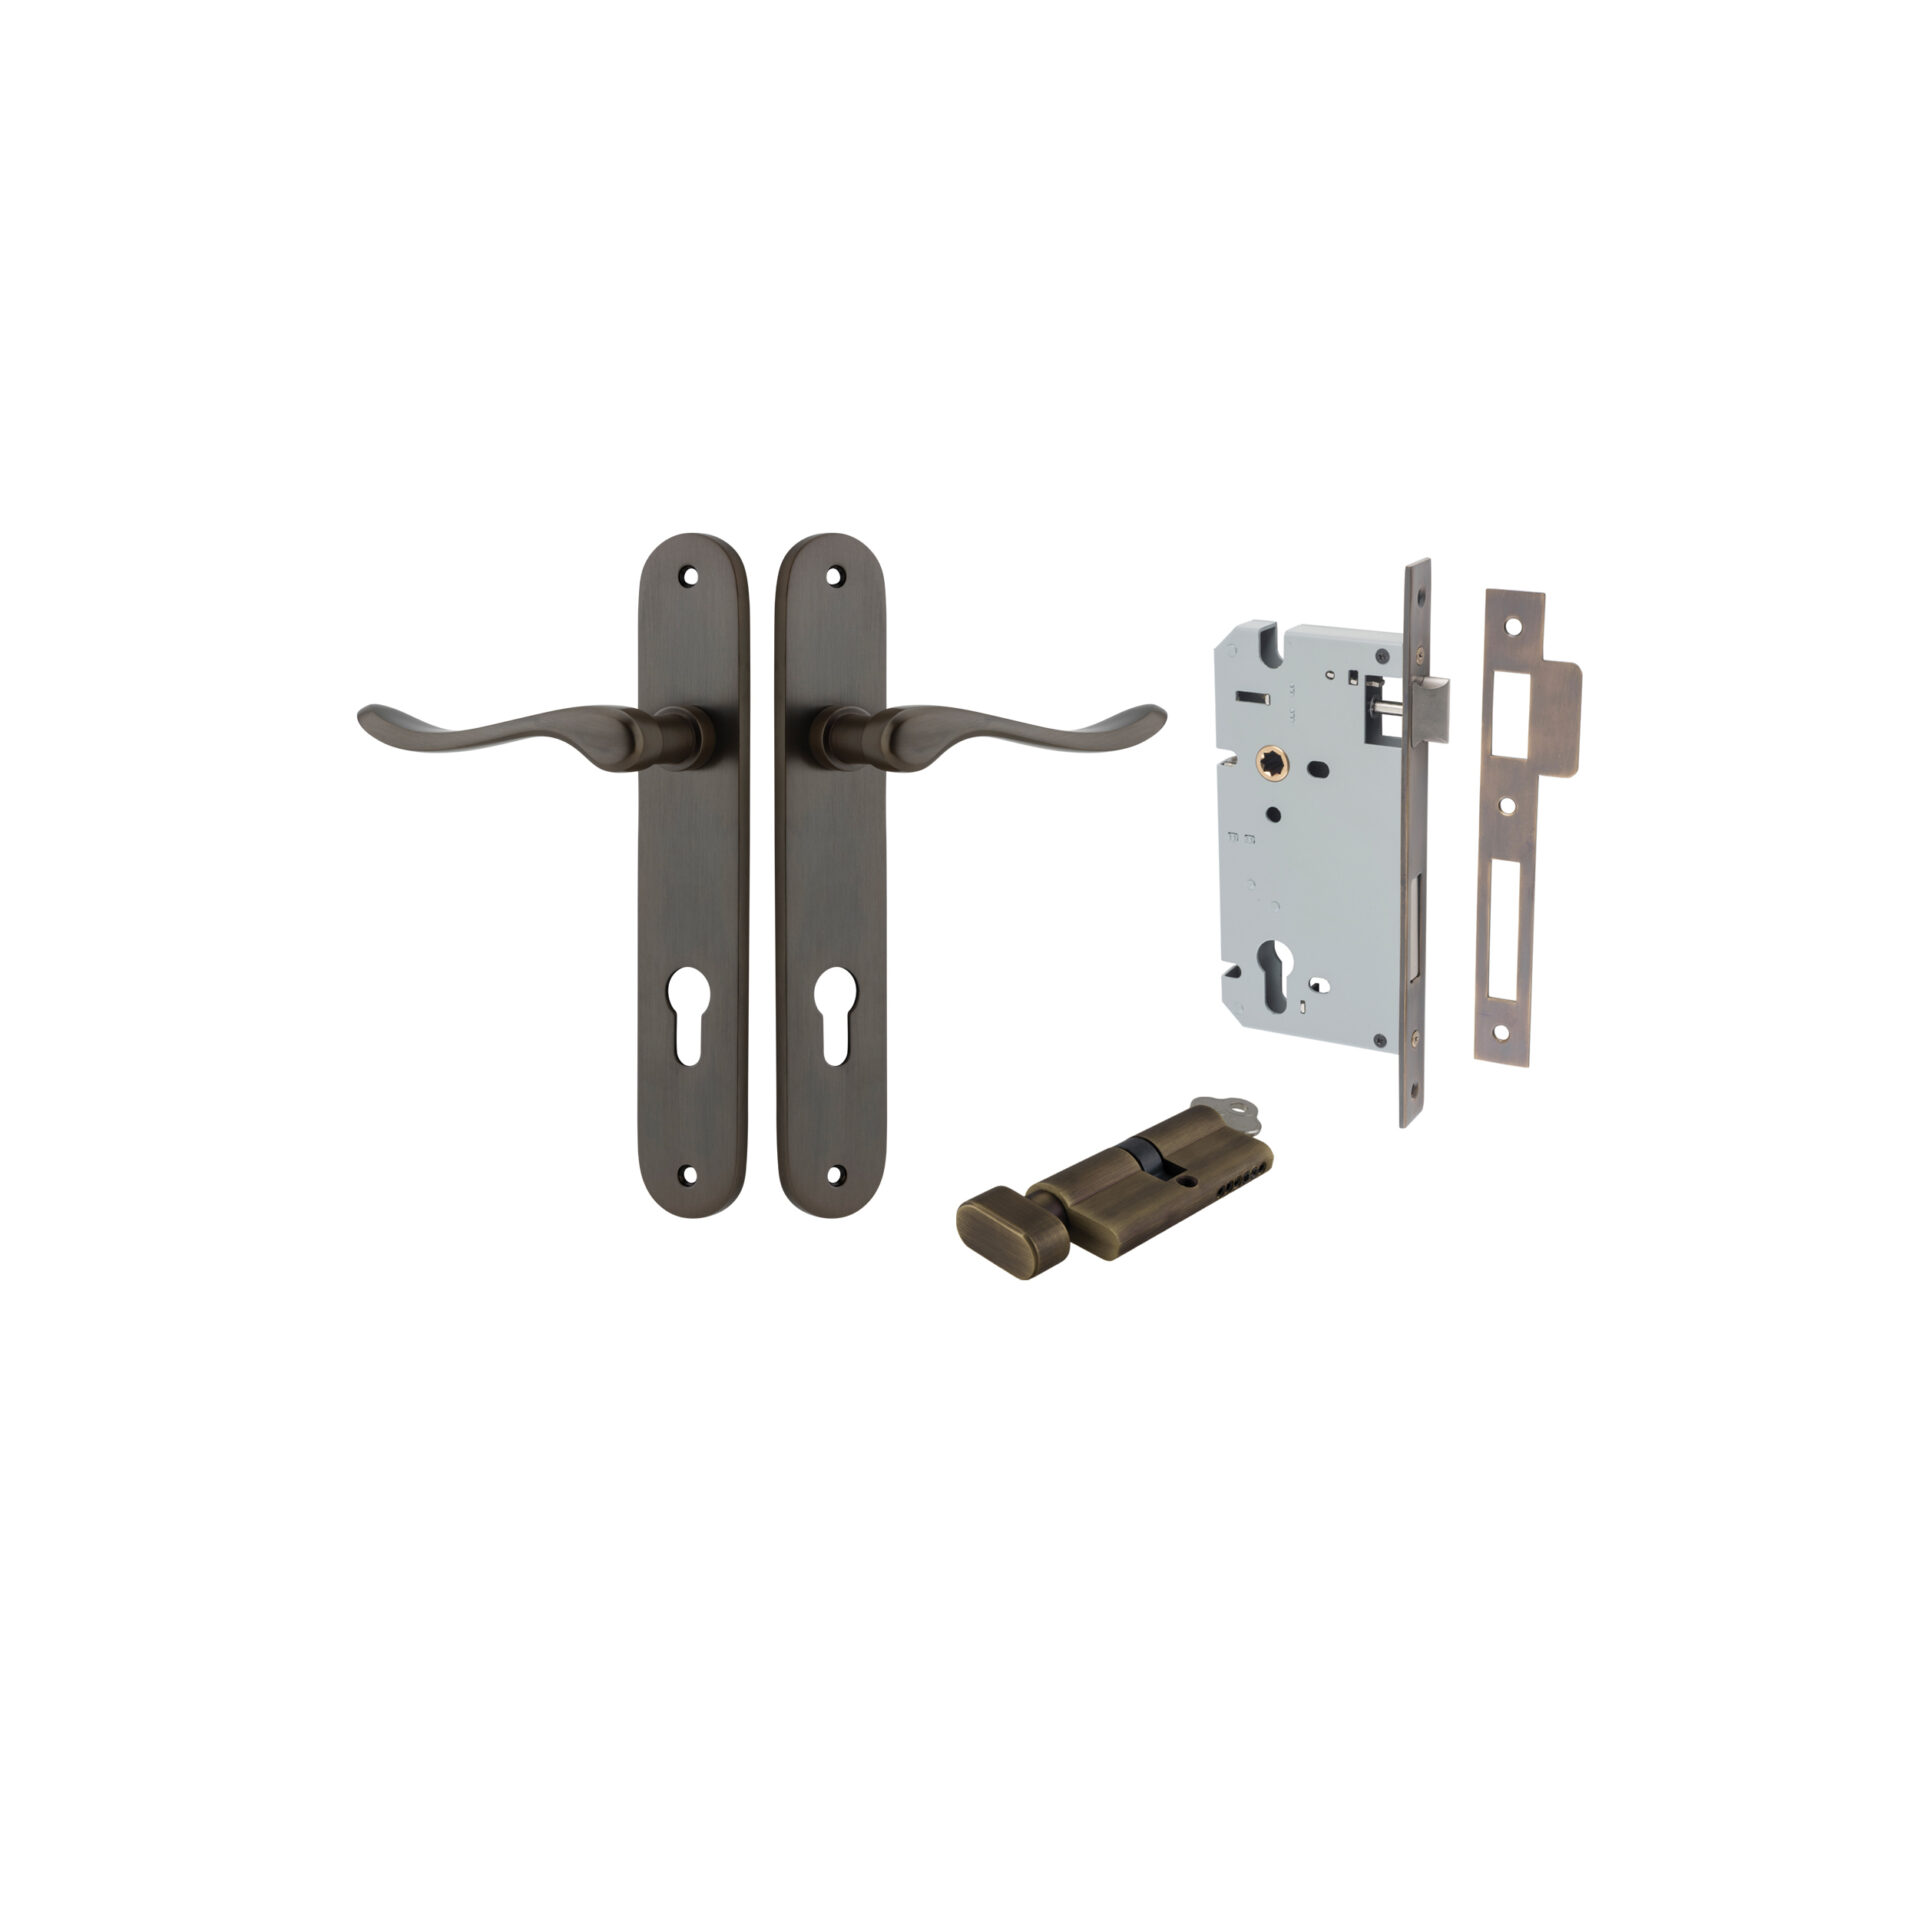 Stirling Lever - Oval Backplate Entrance Kit with High Security Lock